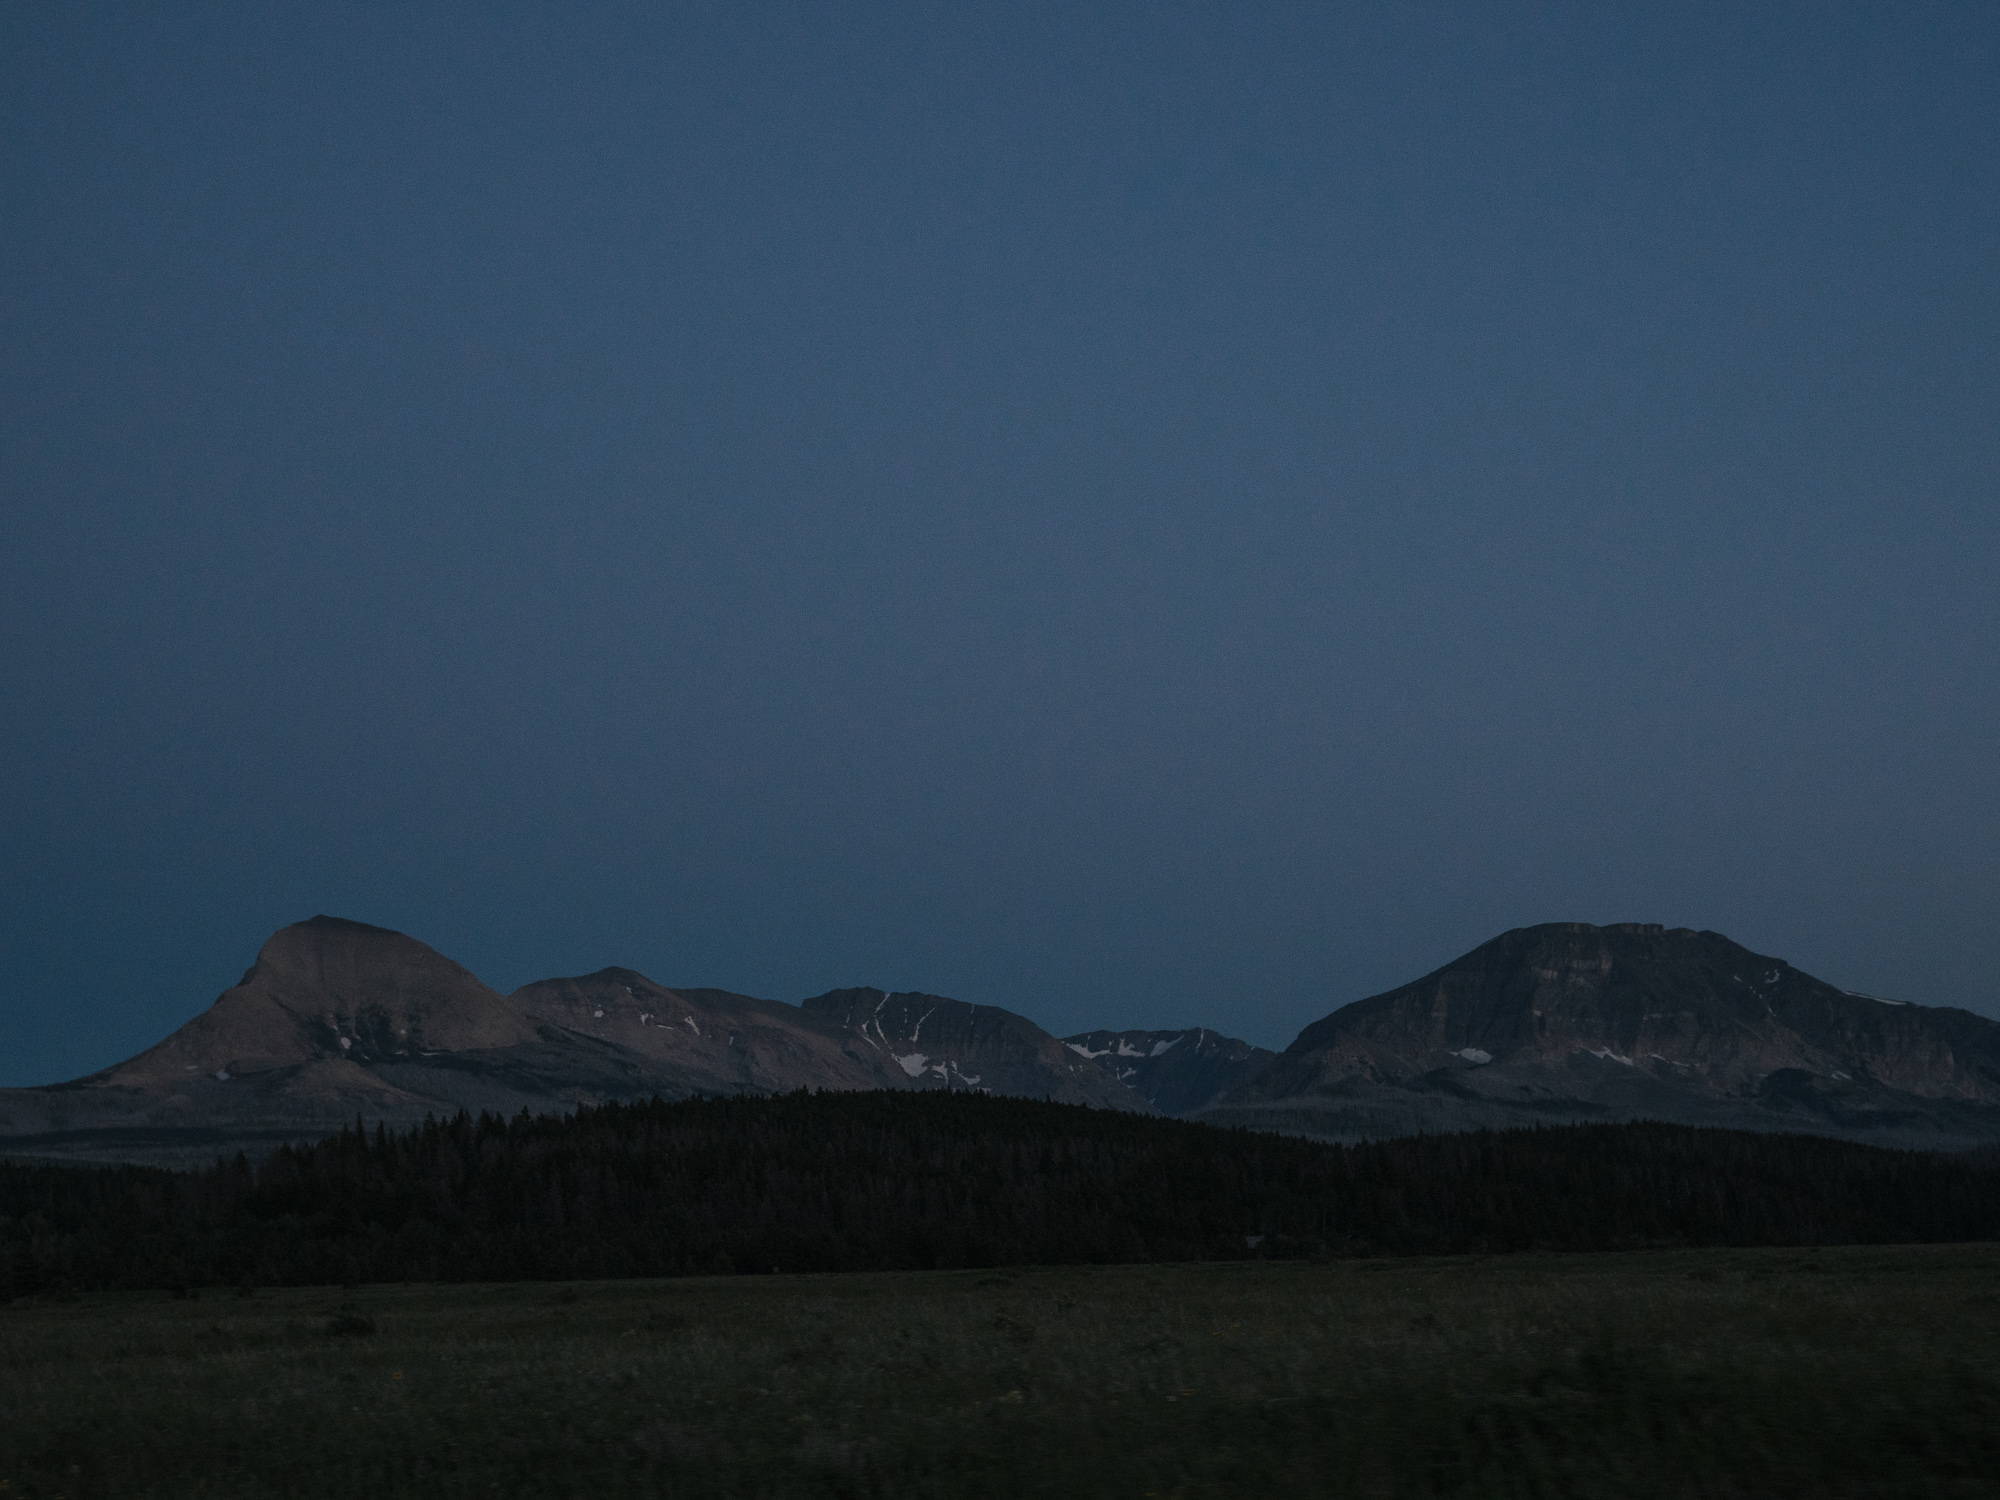 Dark mountain landscape in the night time